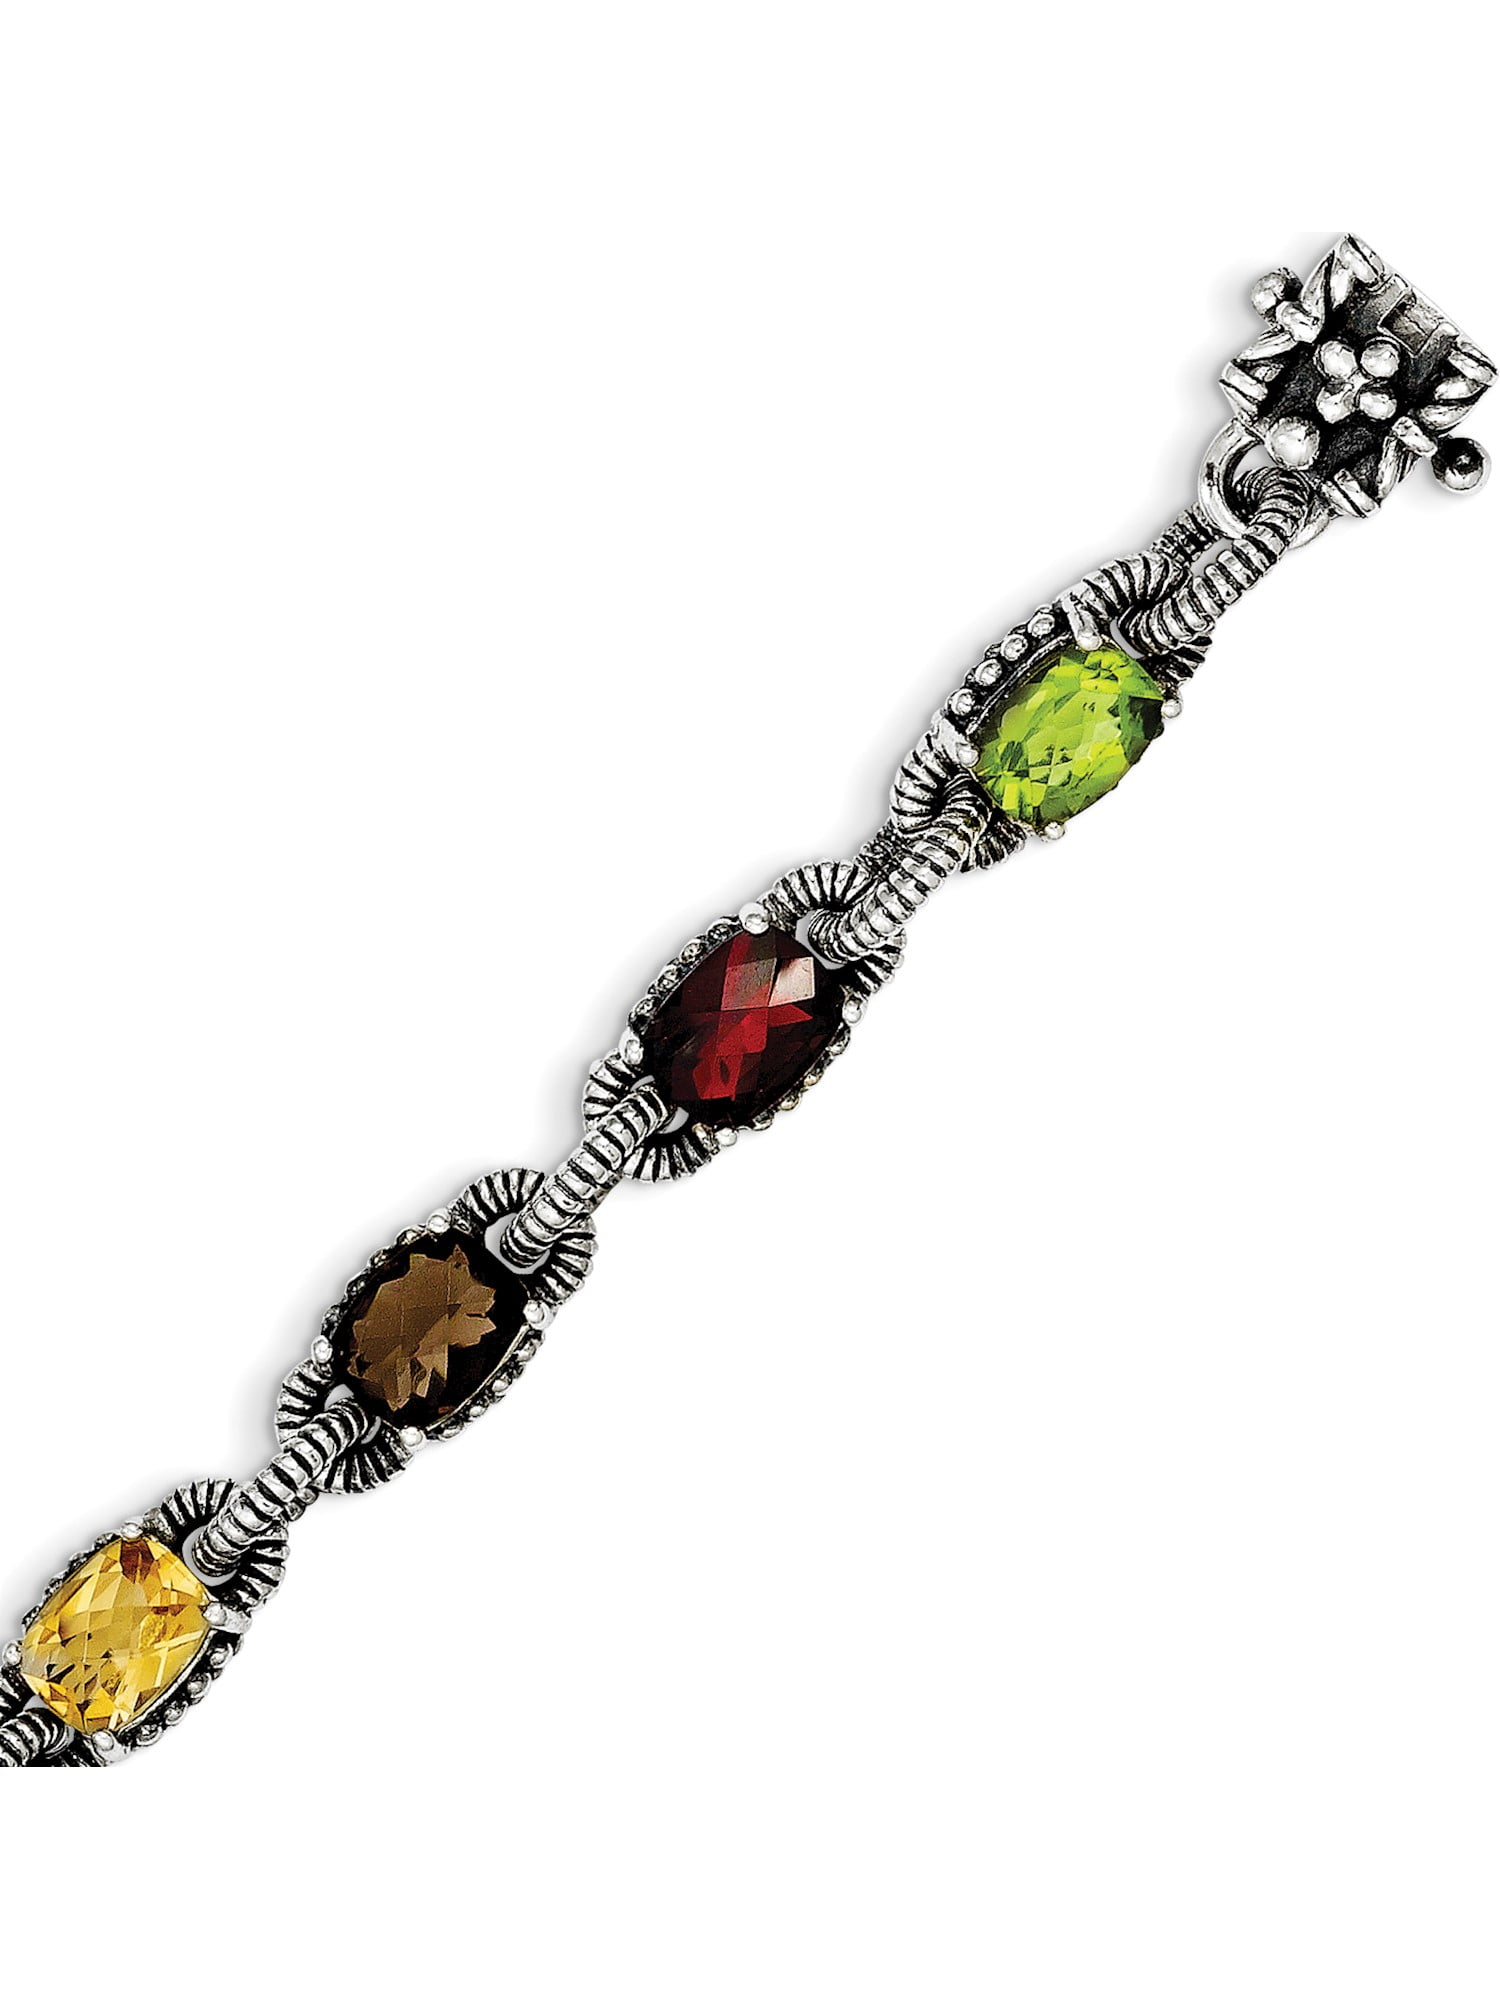 Shey Couture 925 Sterling Silver with Gold-Tone Accent Citrine 10 MM Bracelet 7.25 